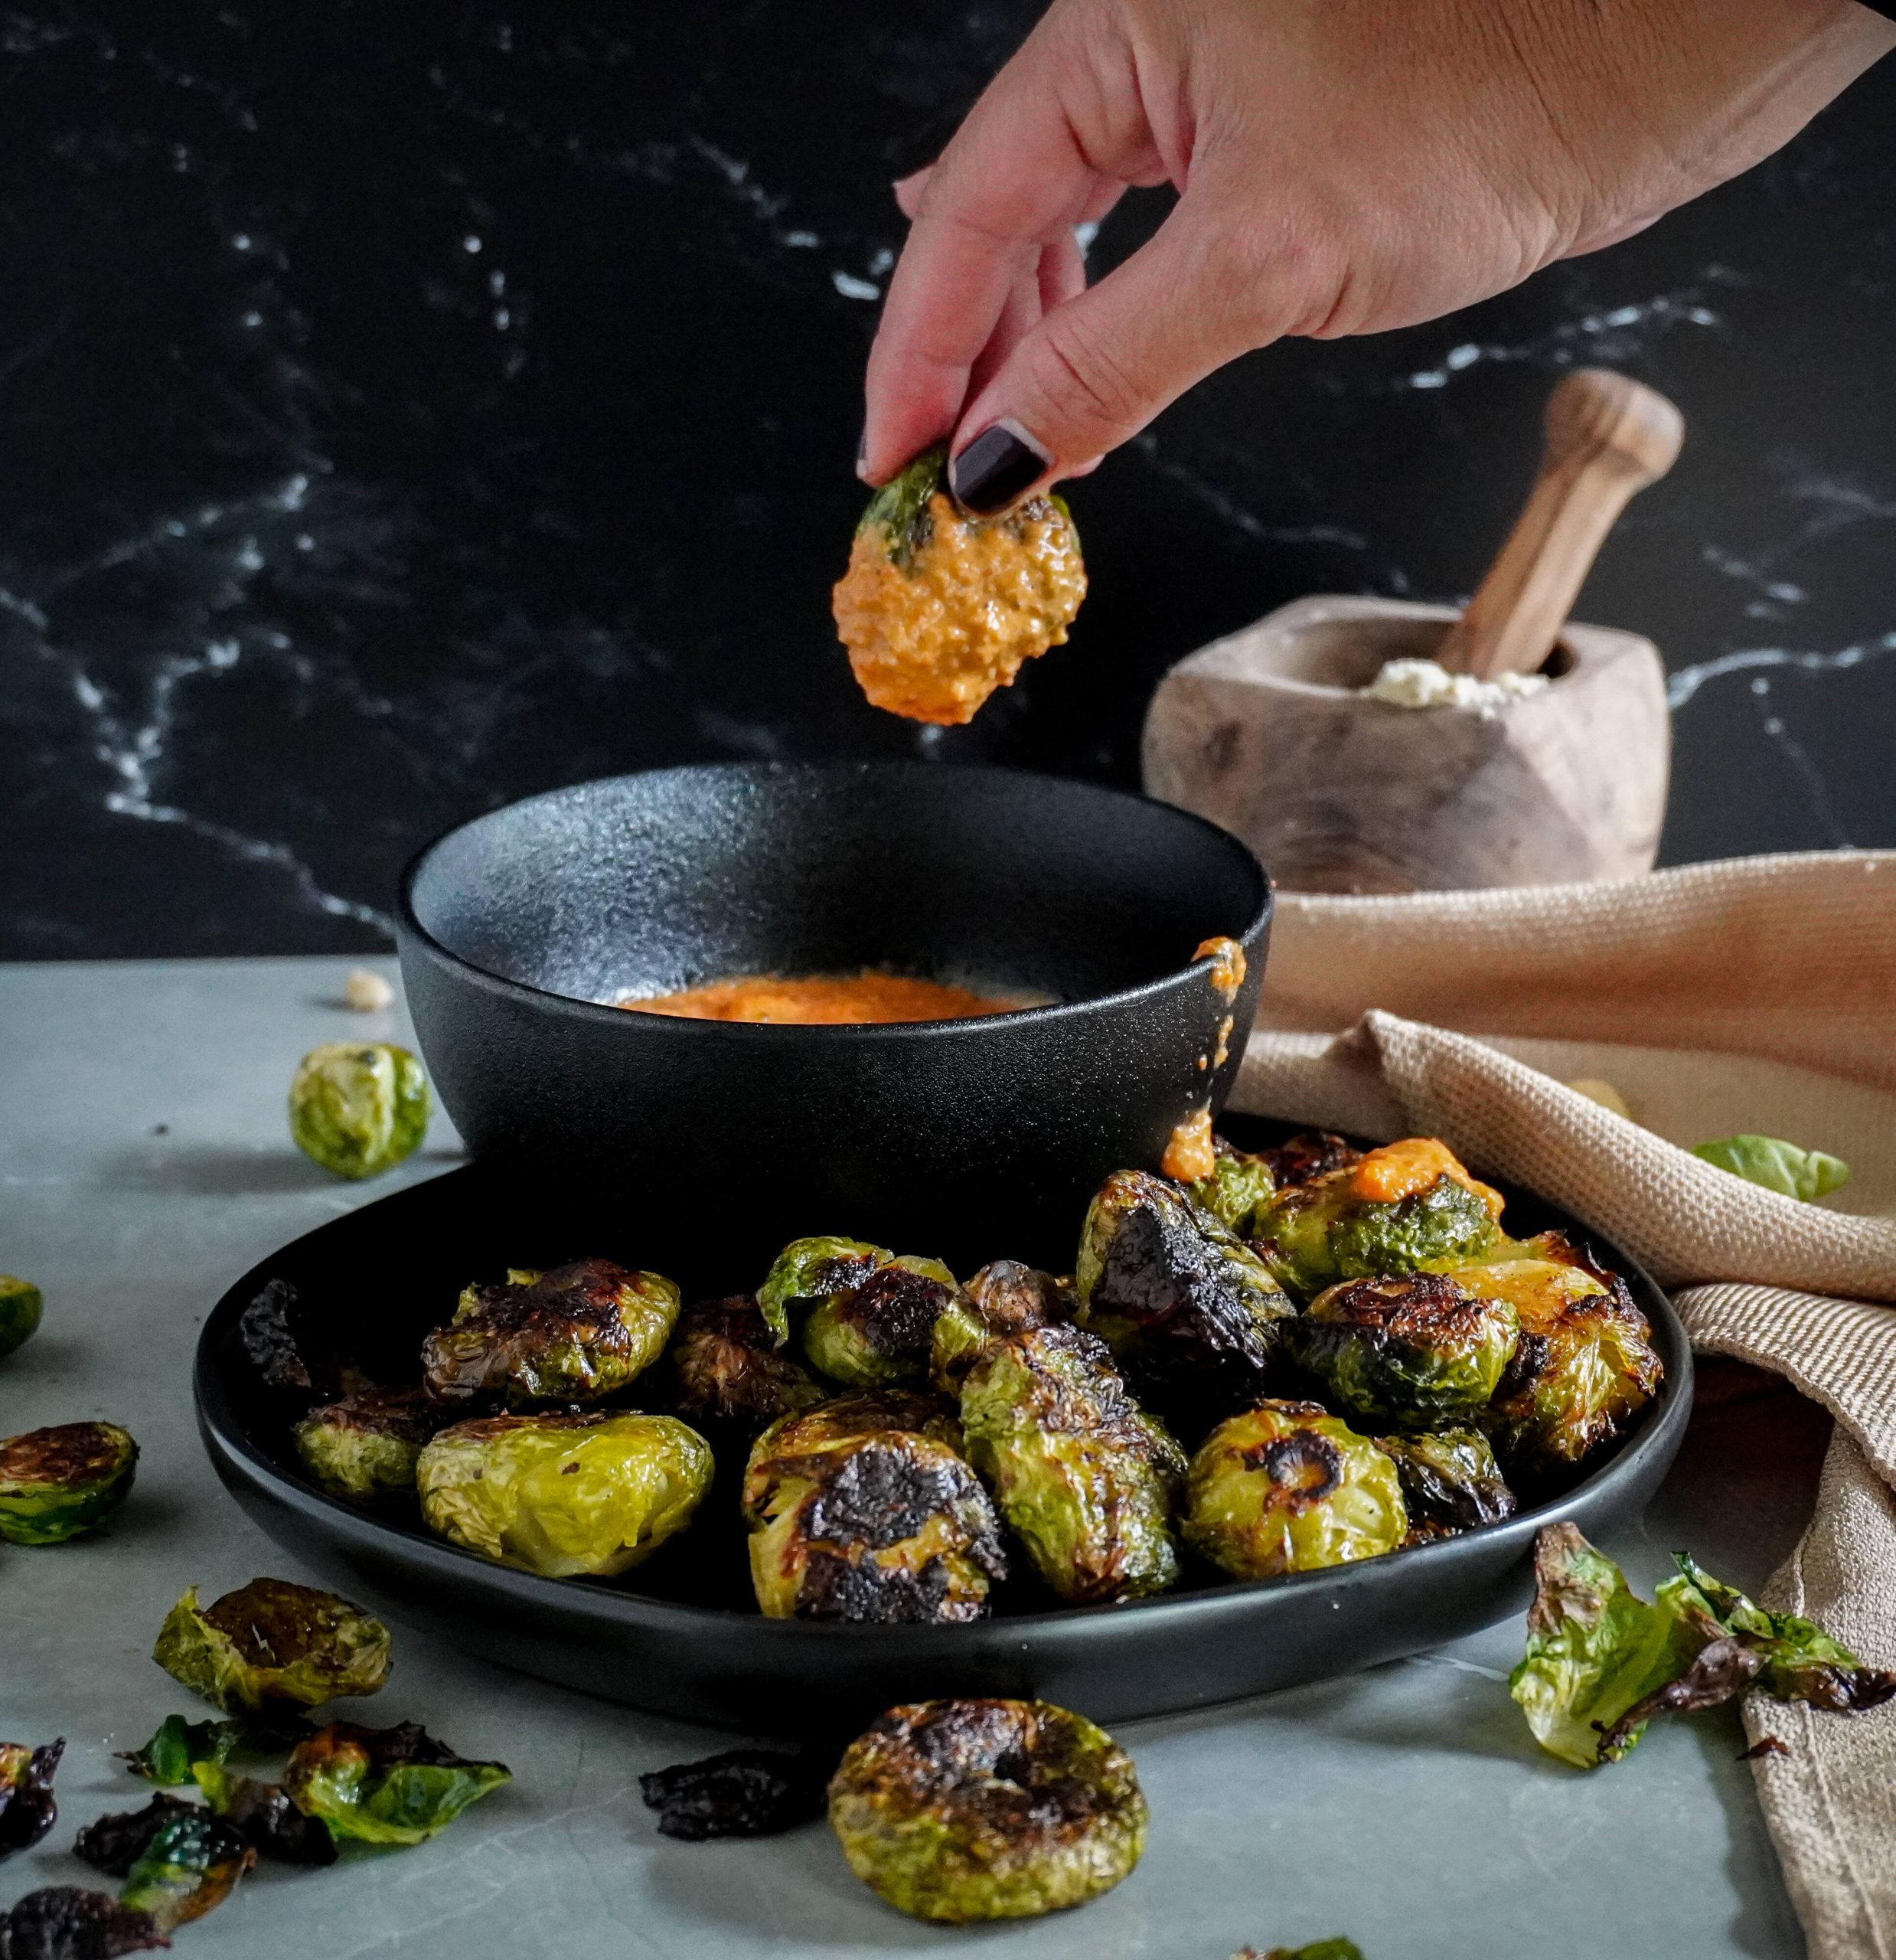 dipping one of the Brussel sprouts into the romesco sauce. 